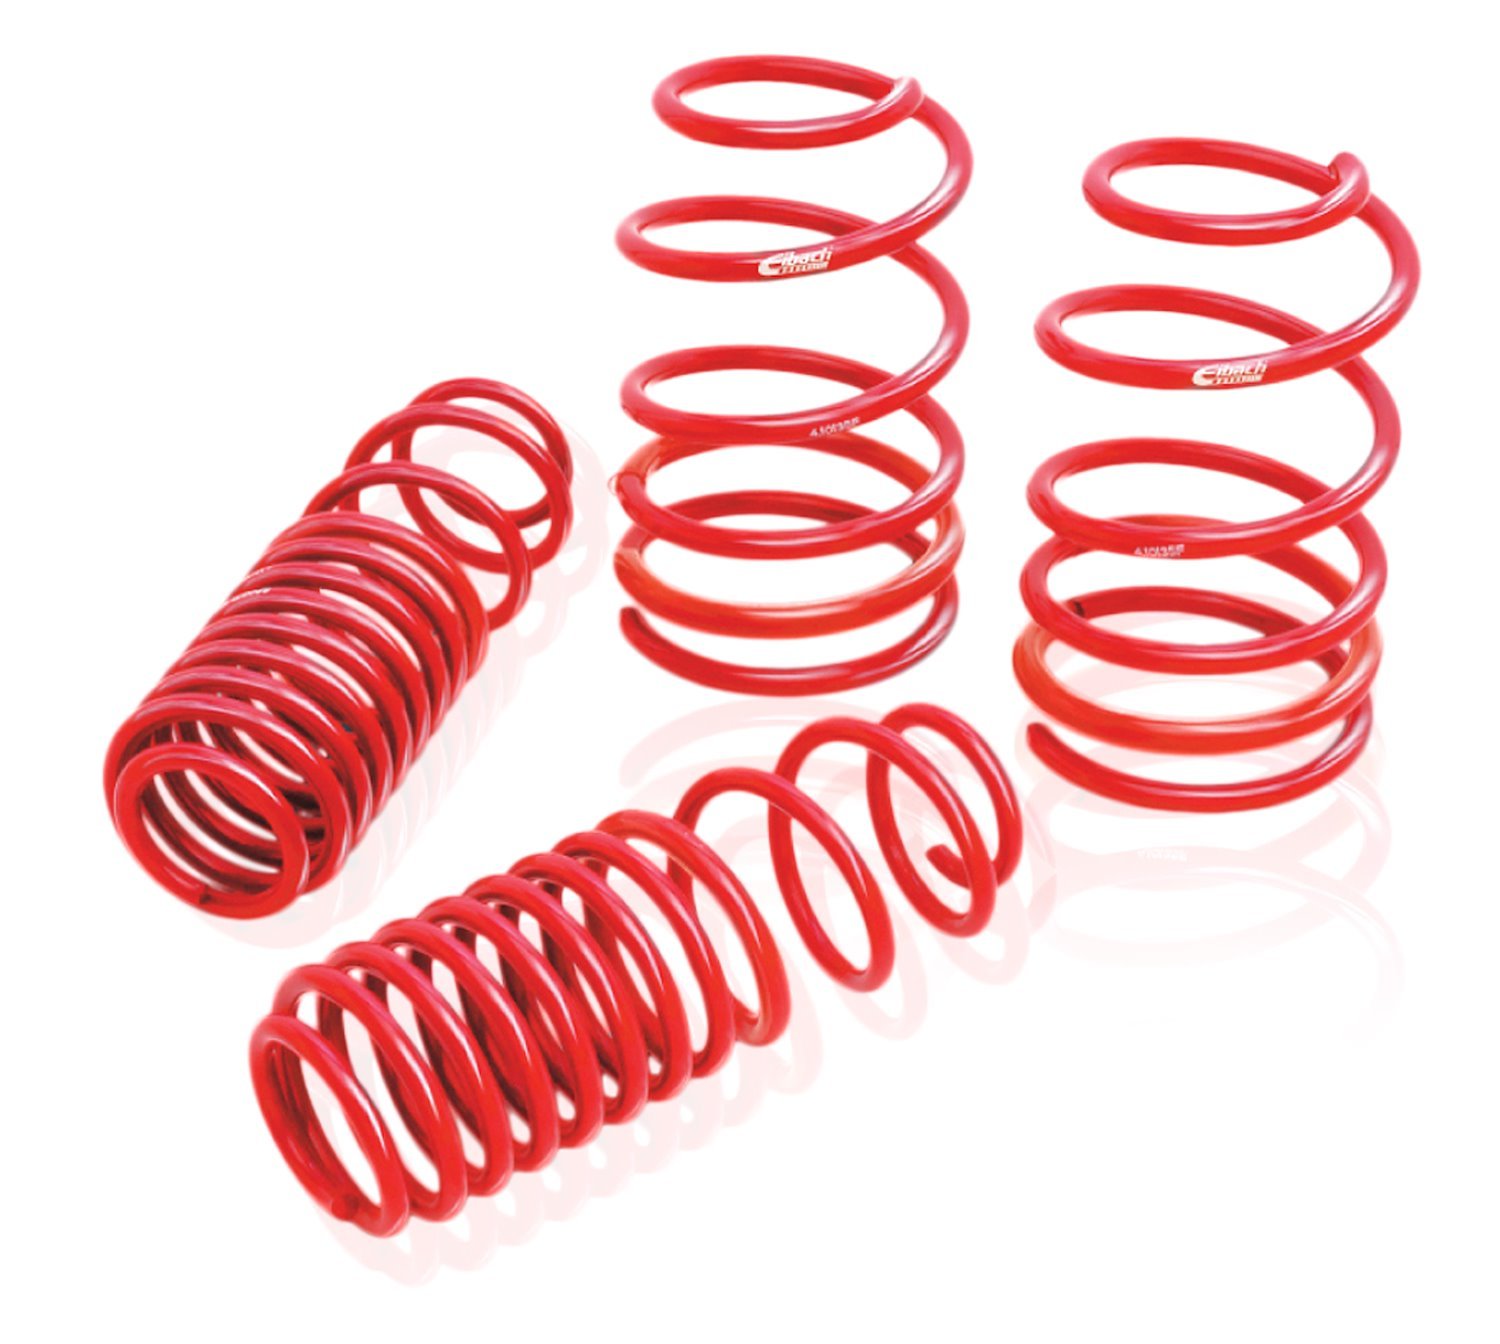 4.1035 Sportline Lowering Springs 1973-93 Mustang V8 Coupe - 1.7" Front/1.5" Rear Drop